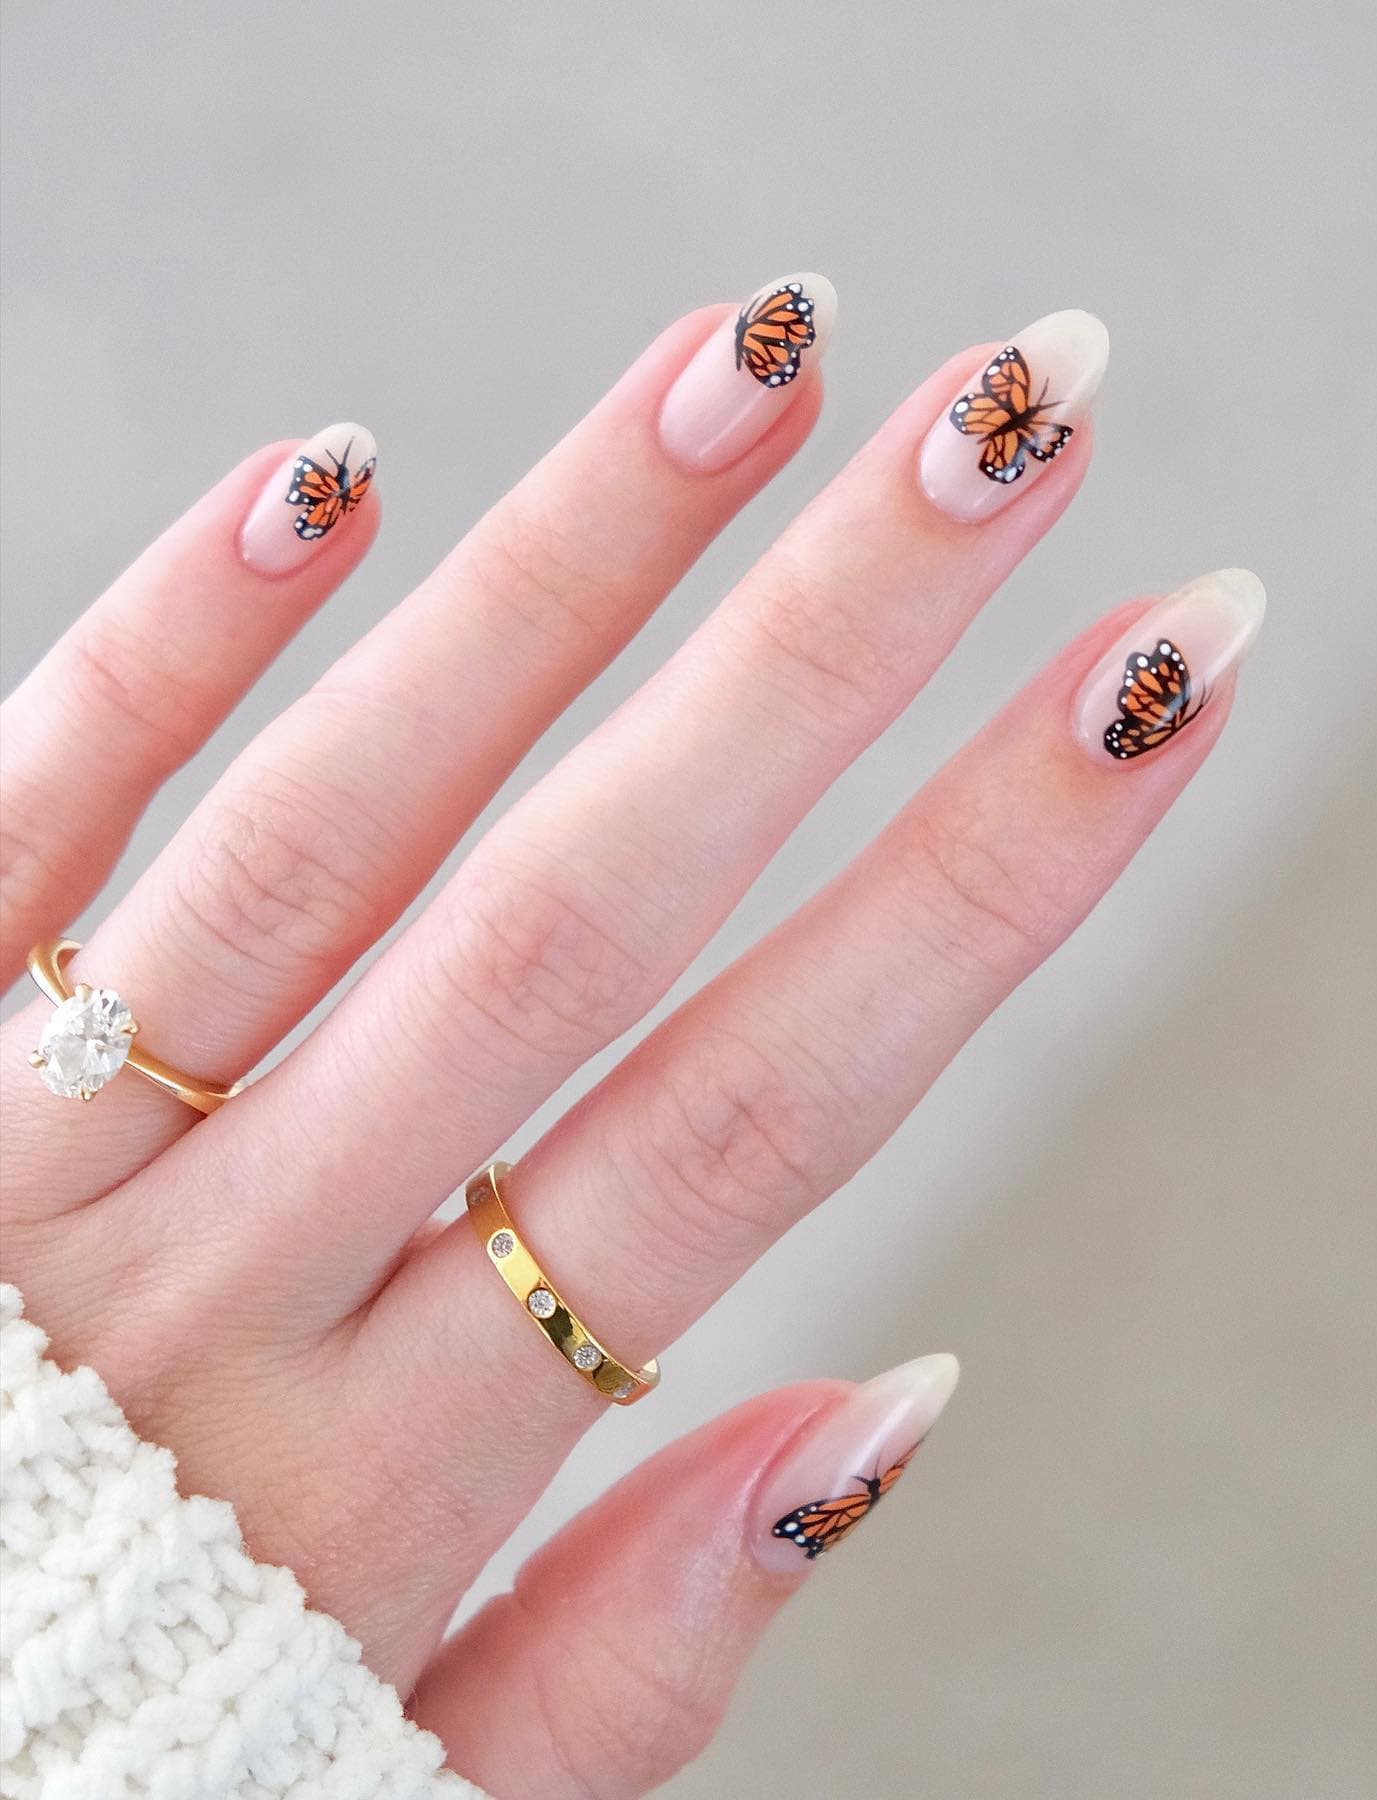 A hand with milky white almond nails with orange butterflies